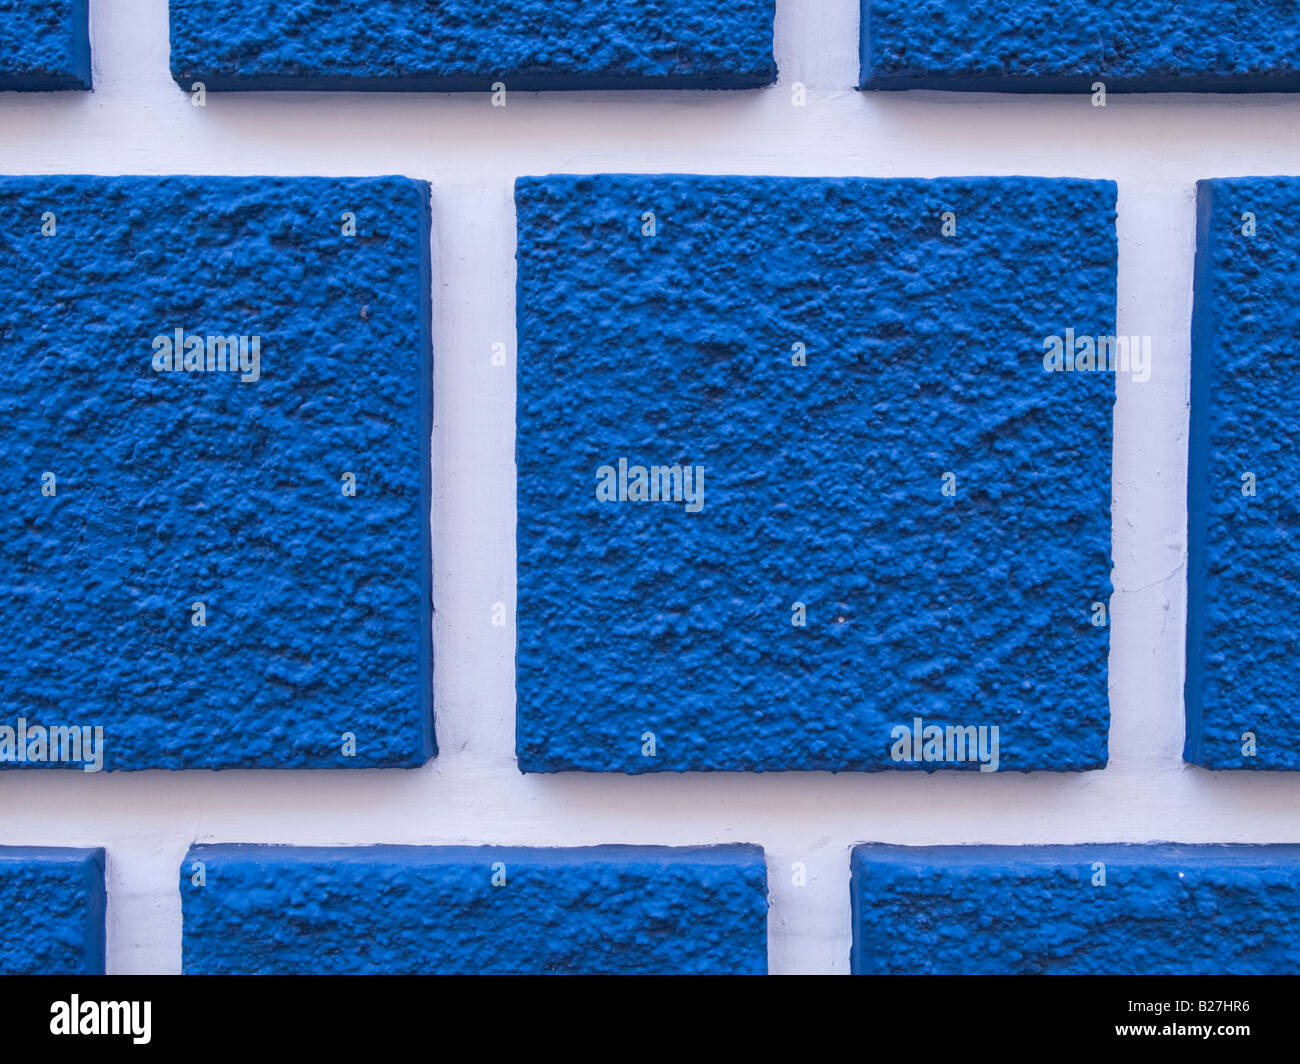 Exterior view of blue squares on the building Stock Photo